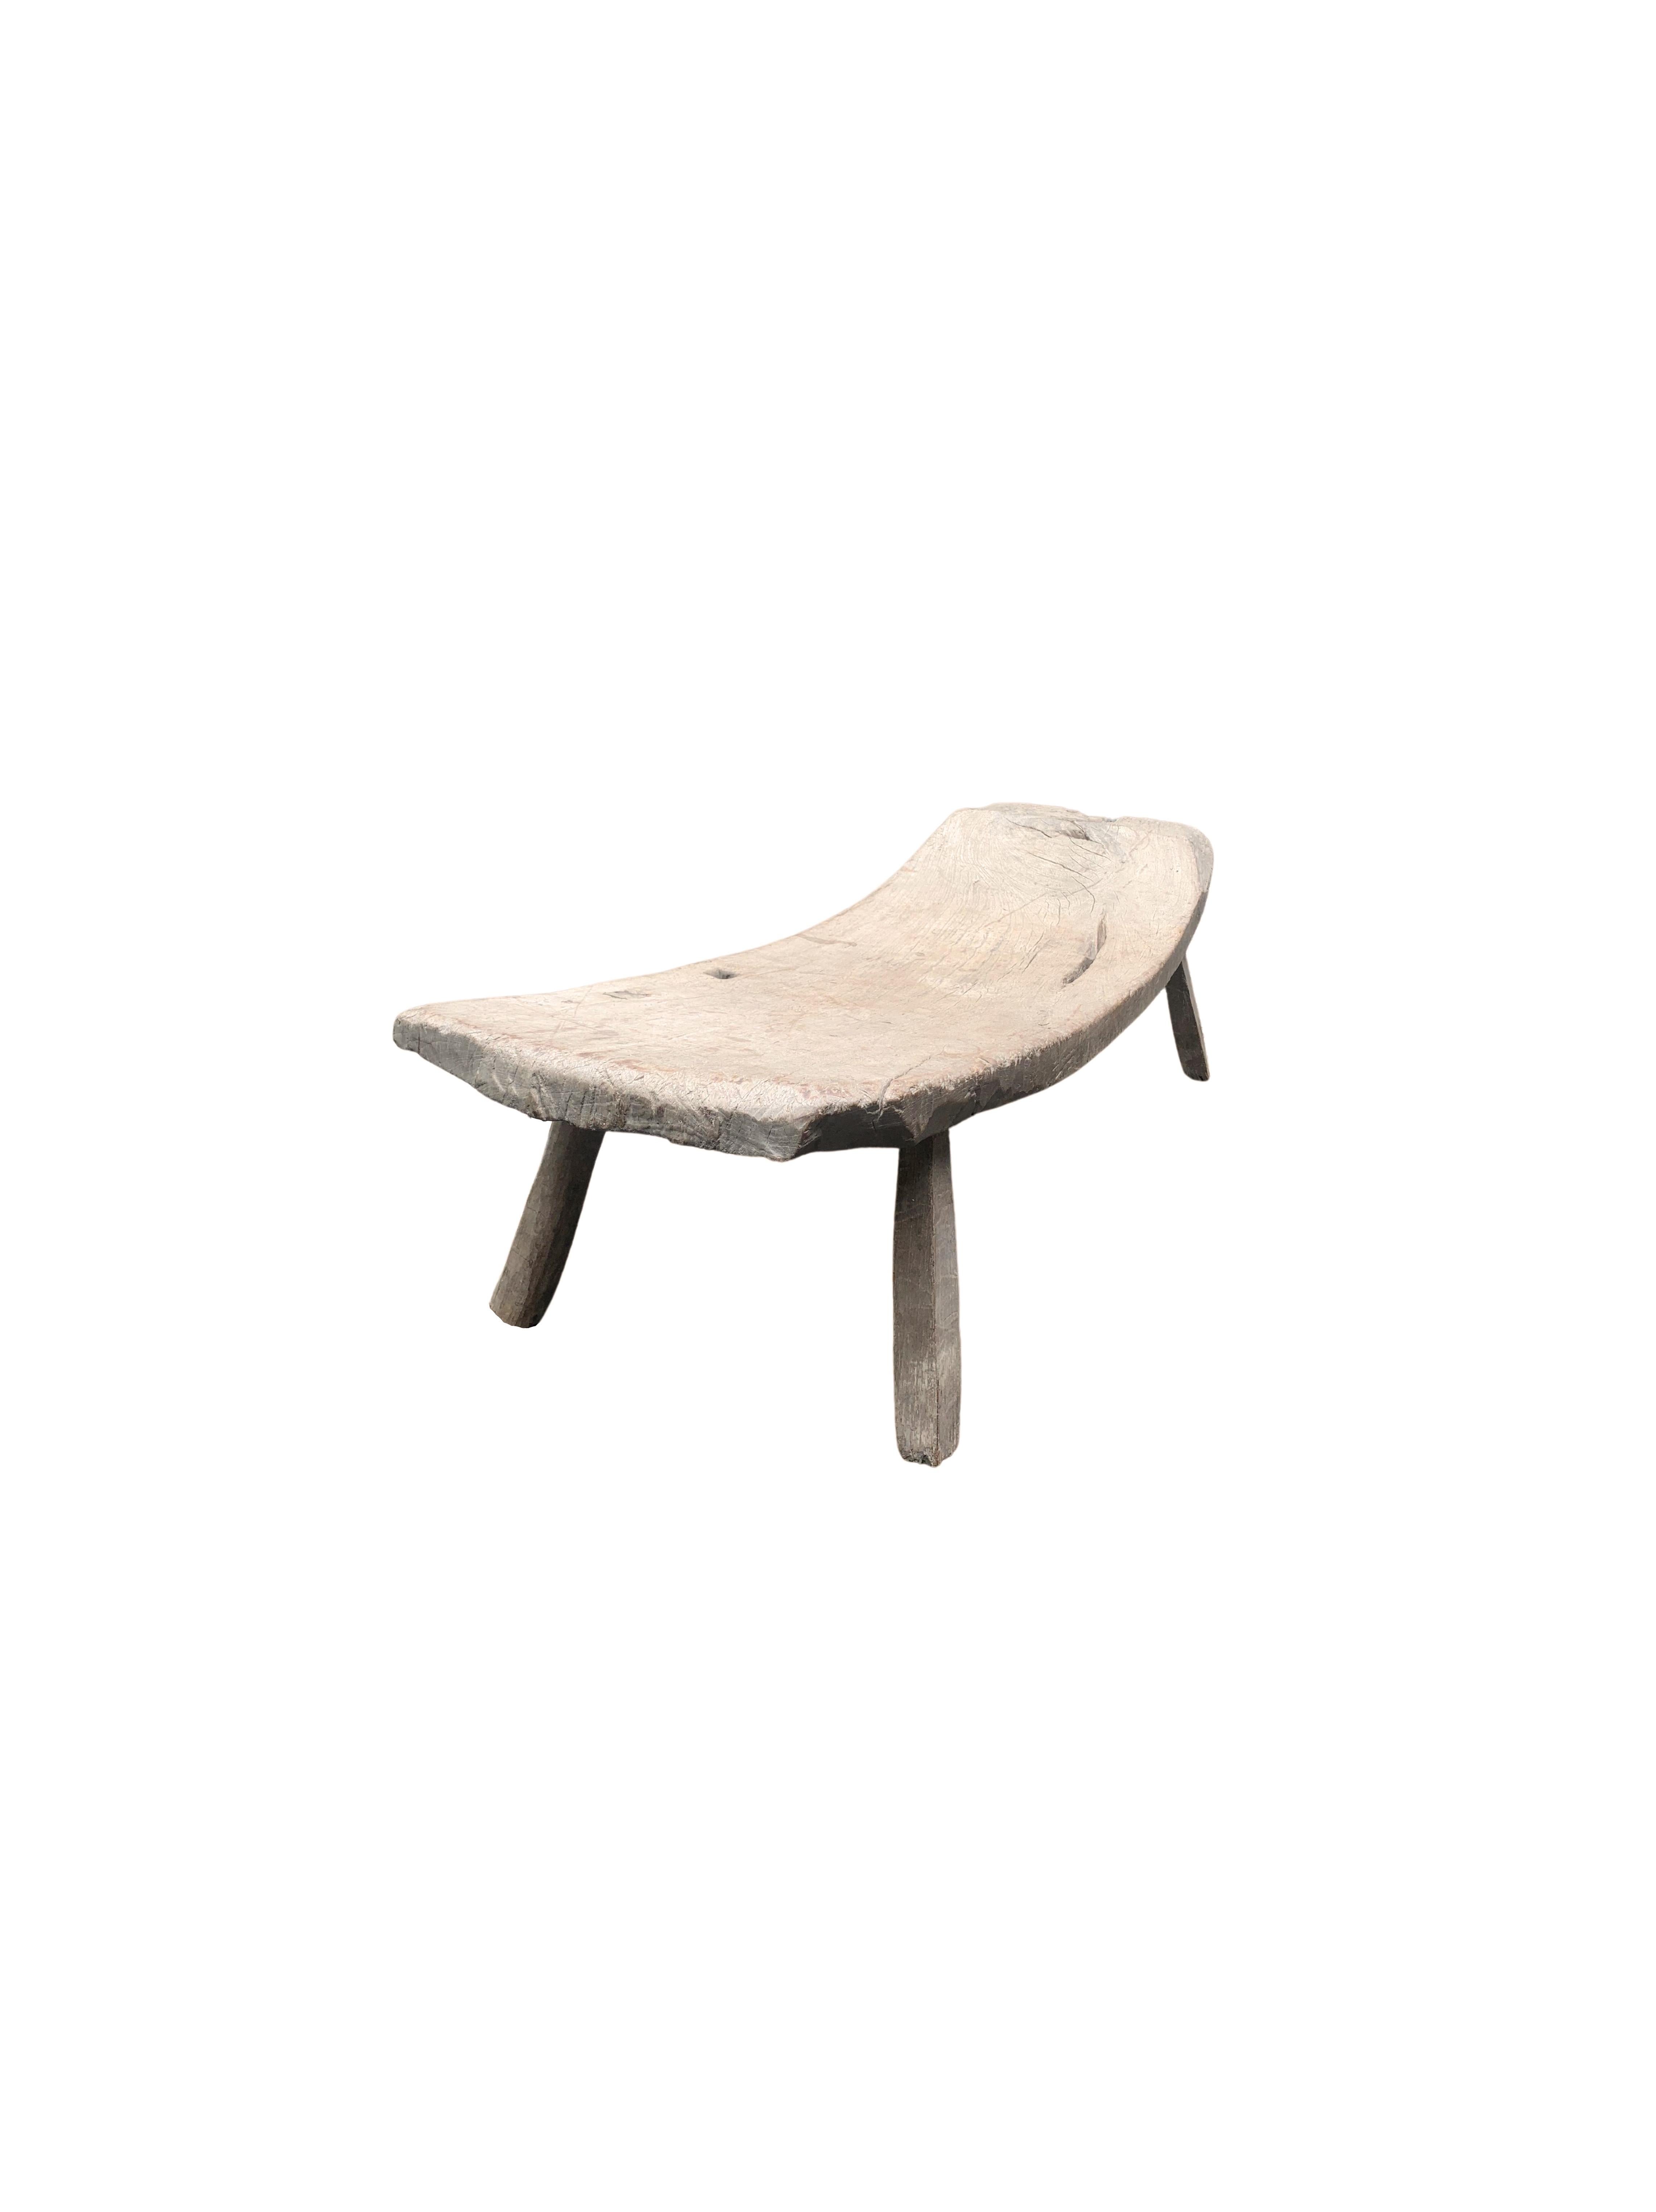 This hand-carved teak wood bench originates from the Island of Madura, off the coast of Northeastern Java. It features a wonderful curved shape with angular legs. The seat was carved from a single block of teak wood and has been given a smooth